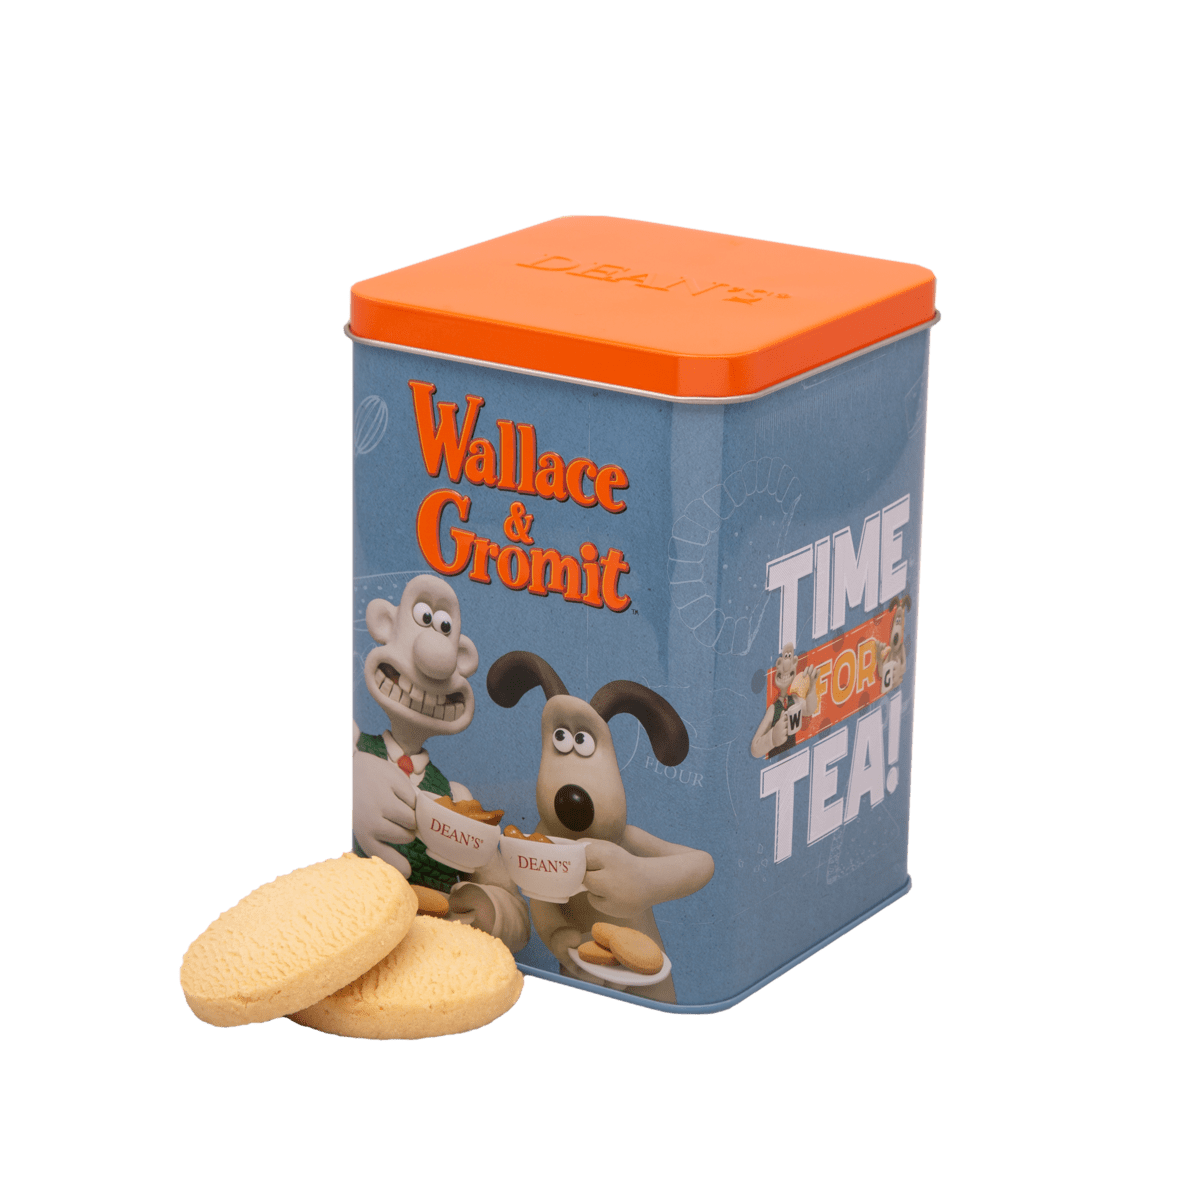 Wallace & Gromit "Time for Tea" All Butter Shortbread Rounds 300g